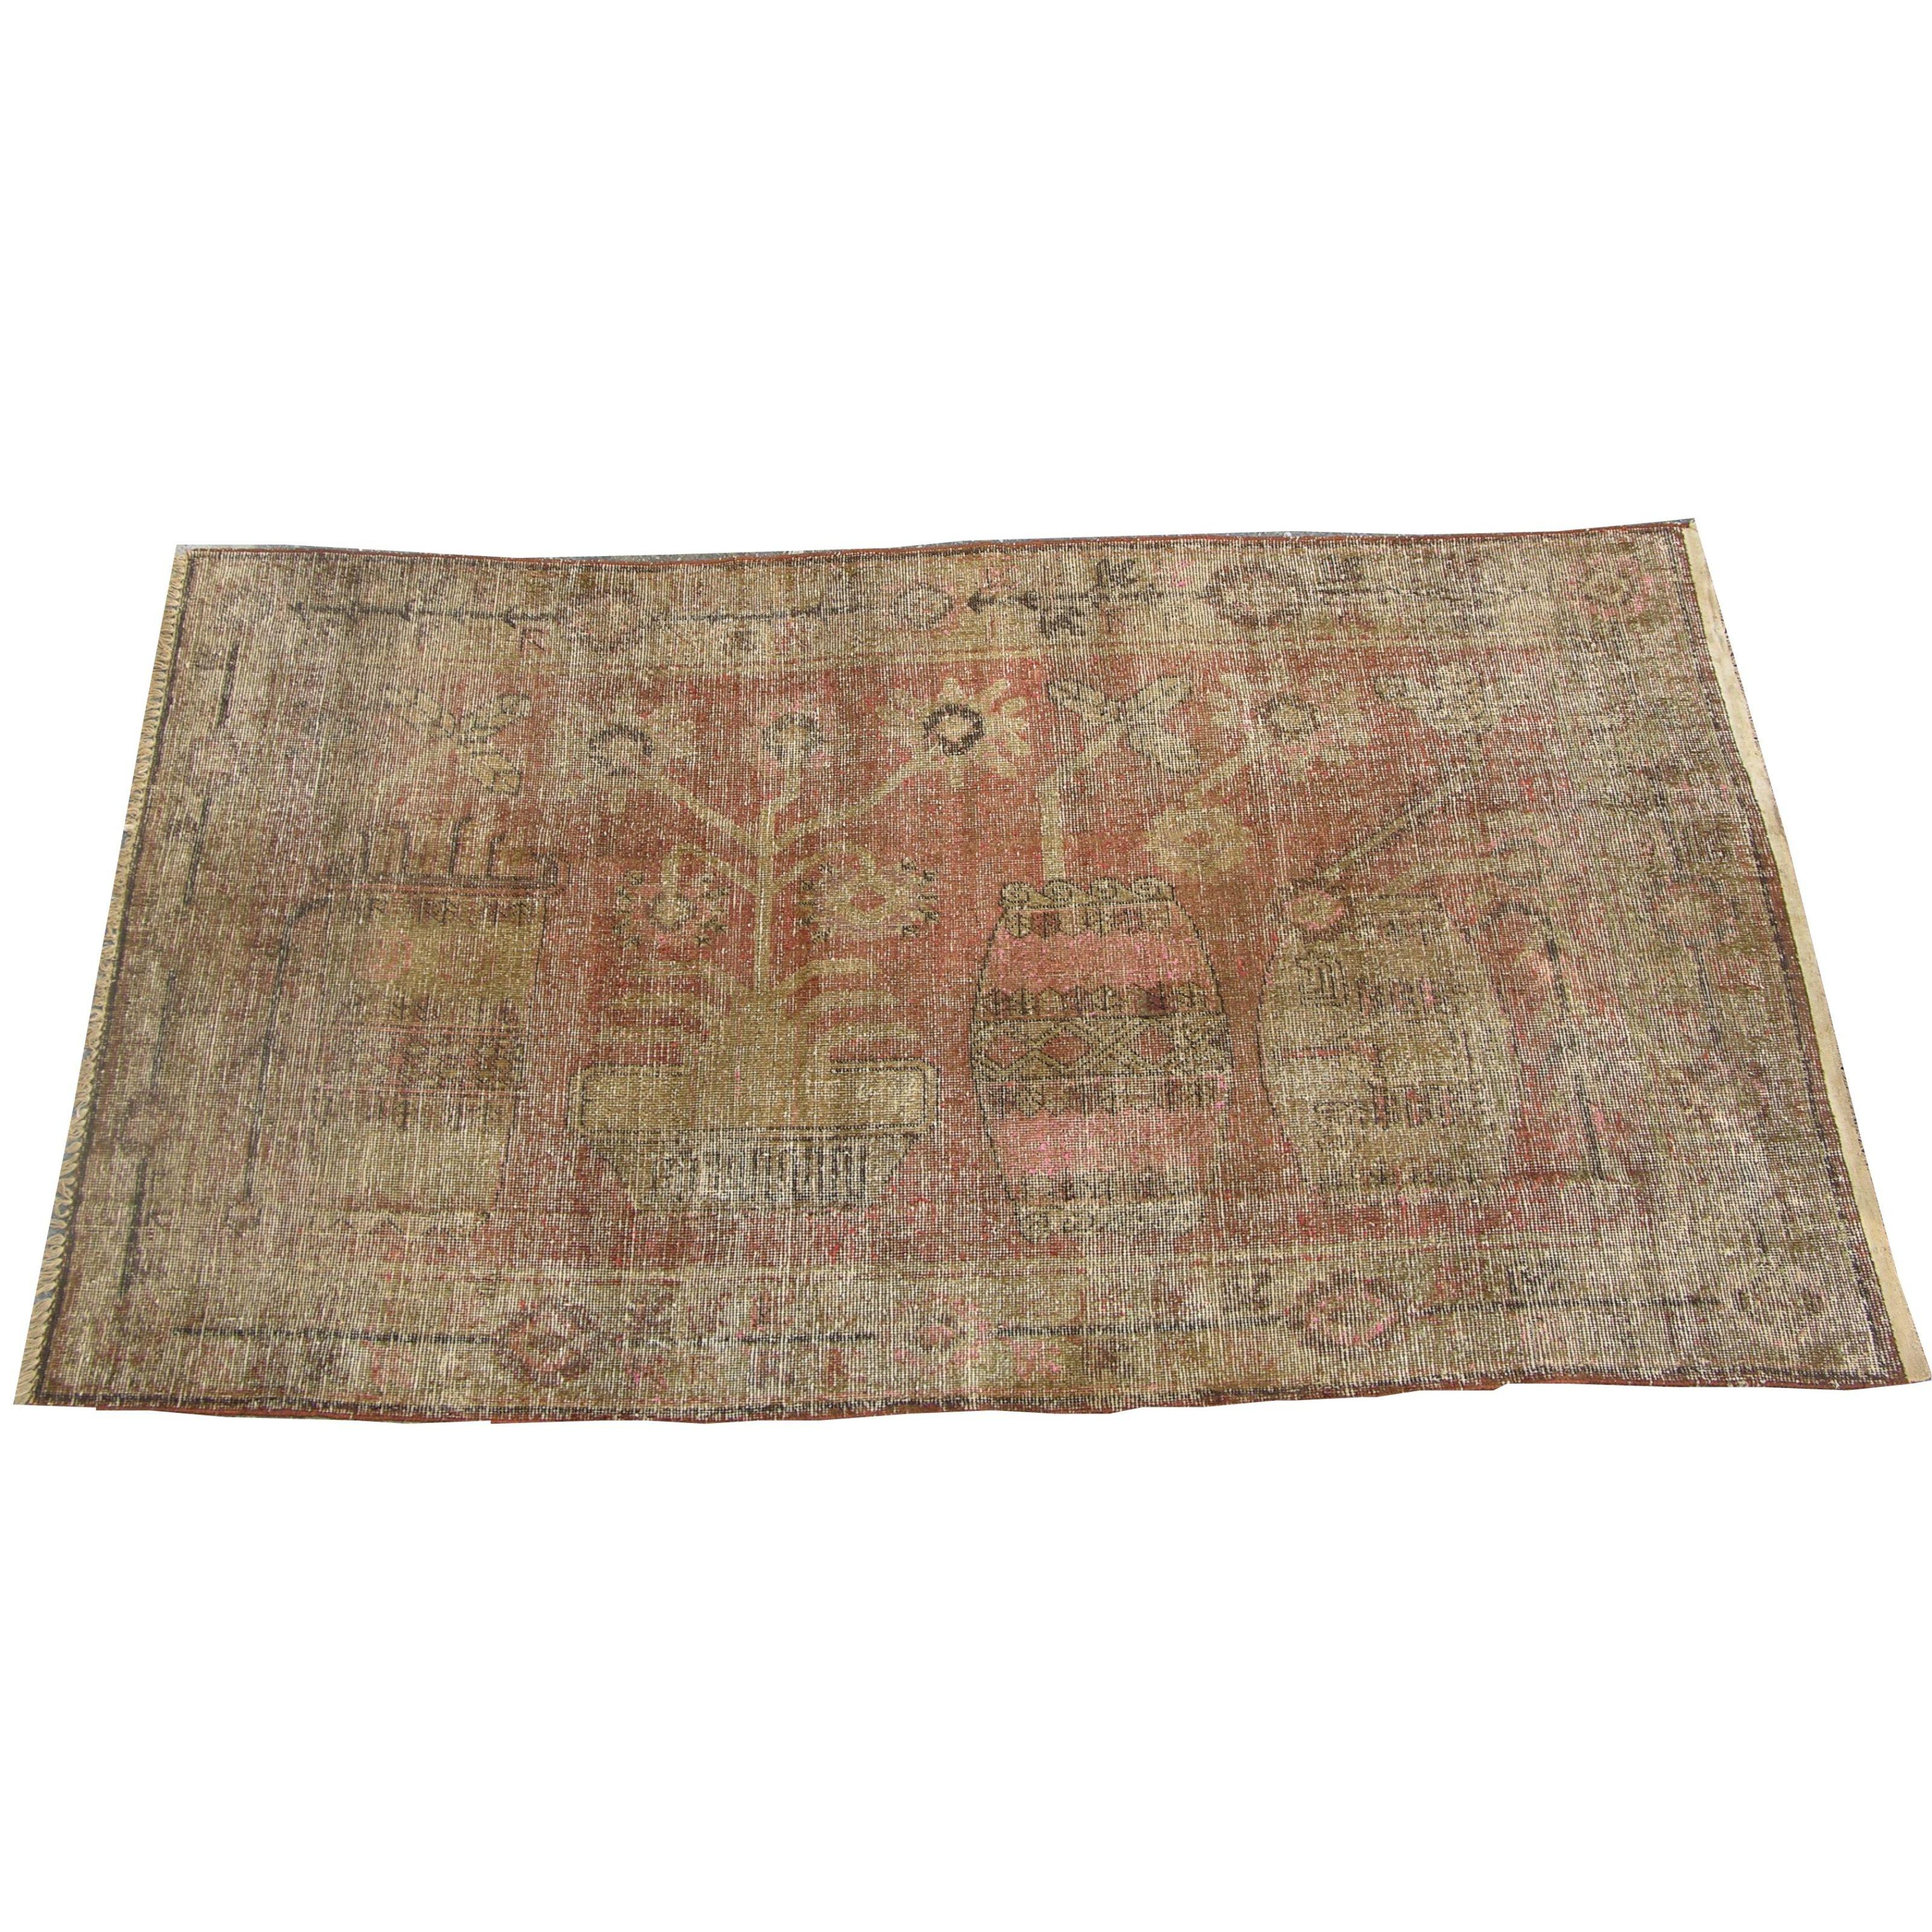 19th Century Antique Khotan Samarkand Rug 8'5'' X 4'10'' In Good Condition For Sale In Los Angeles, US